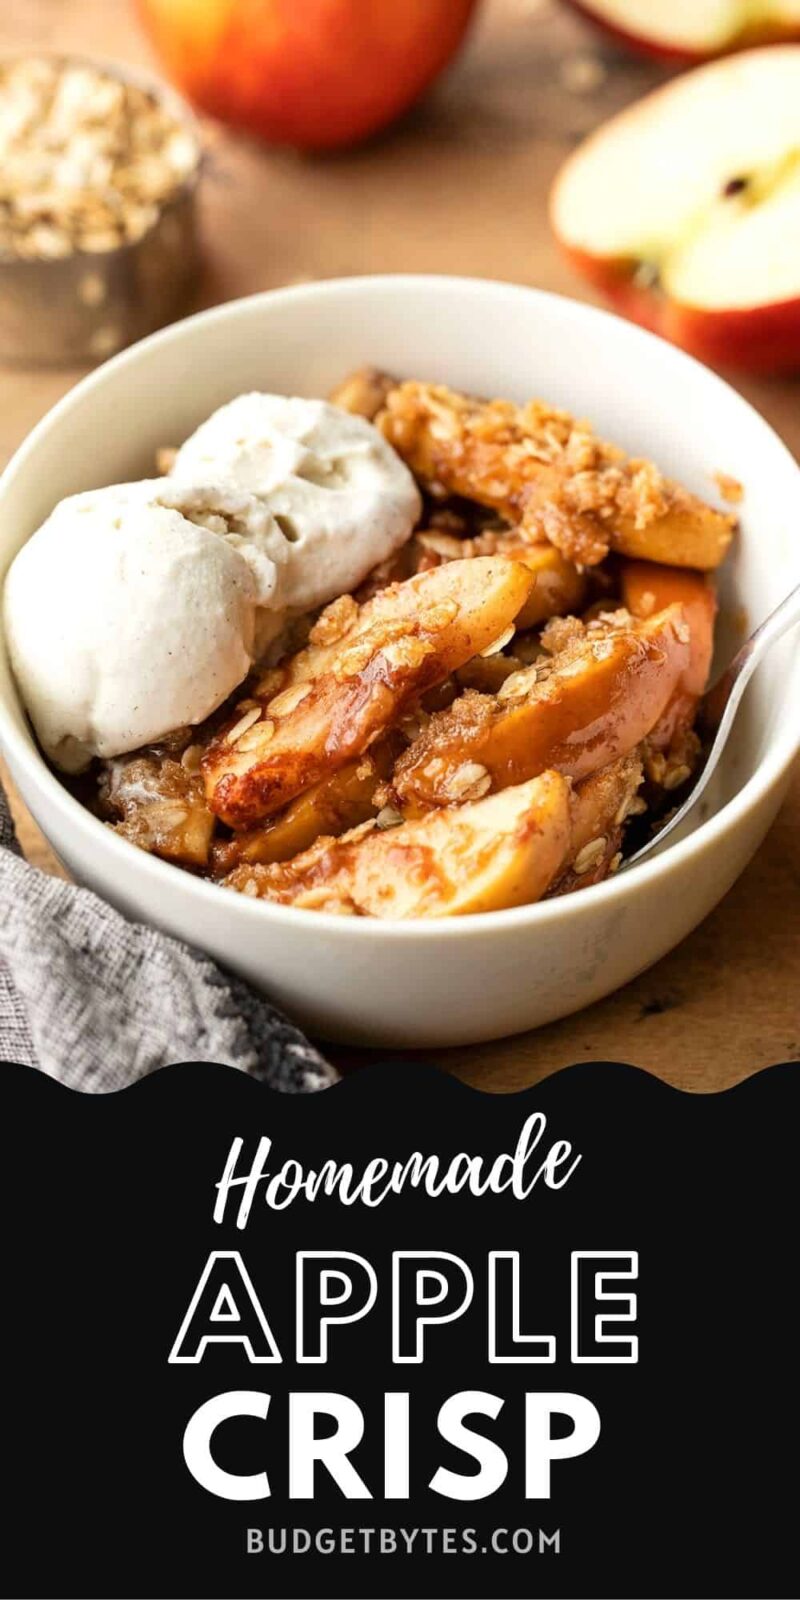 Side view of apple crisp in a bowl with ice cream, title text at the bottom